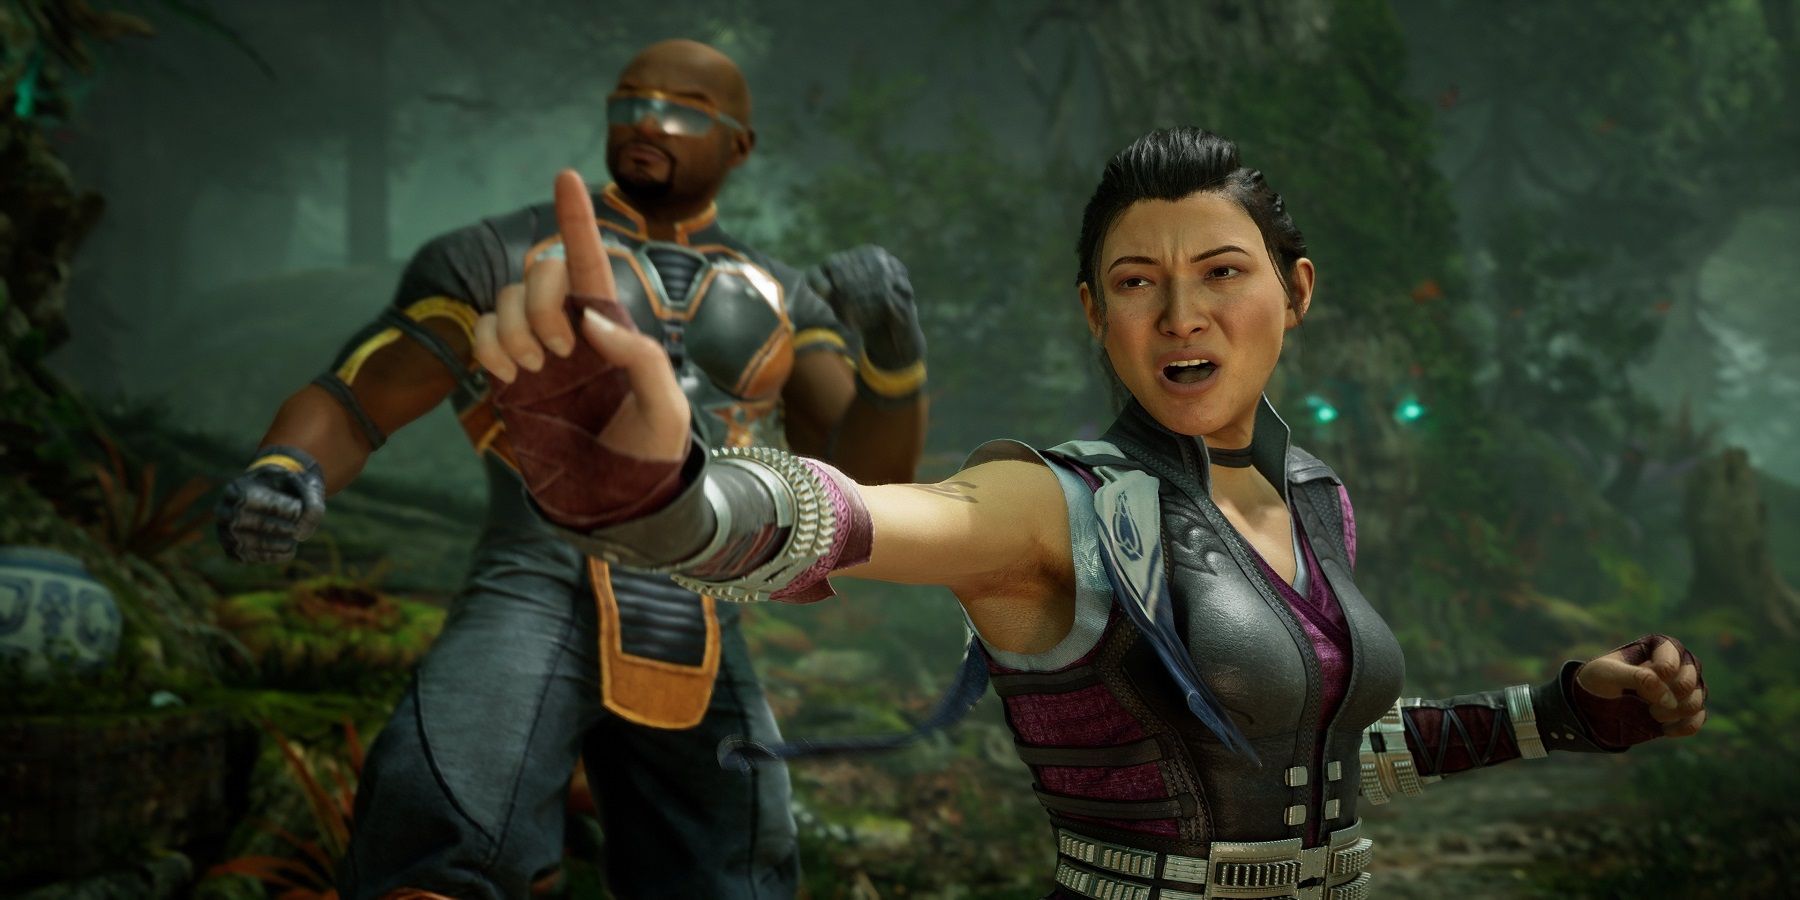 Along with the main roster additions, players now know some of the DLC Kameo fighters for Mortal Kombat 1.